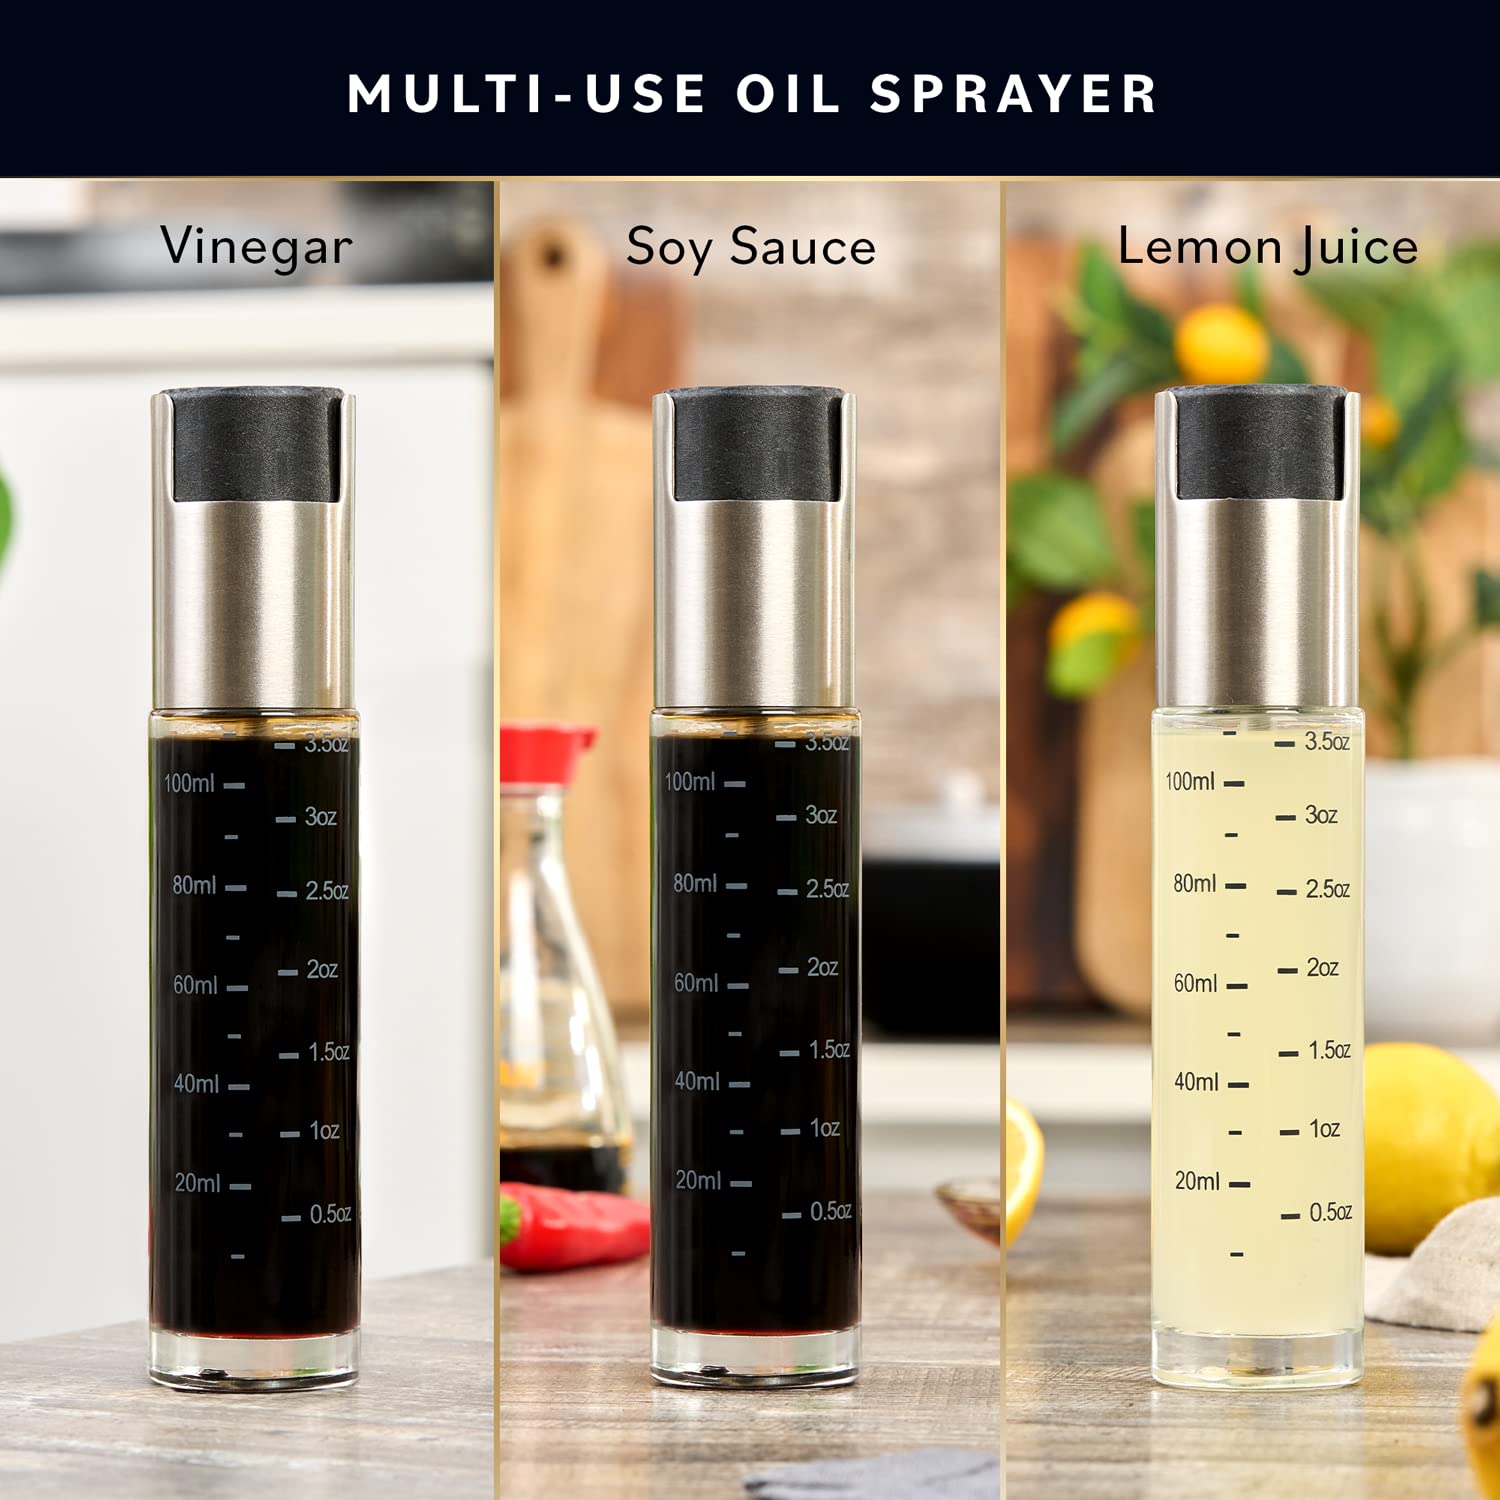 Home Hero 2 Pcs Oil Sprayer for Cooking - 120 ml Olive Oil Sprayer for Cooking - Olive Oil Spray Bottle for Cooking with Funnel & Cleaning Brush (Green & Clear Oil Spray)